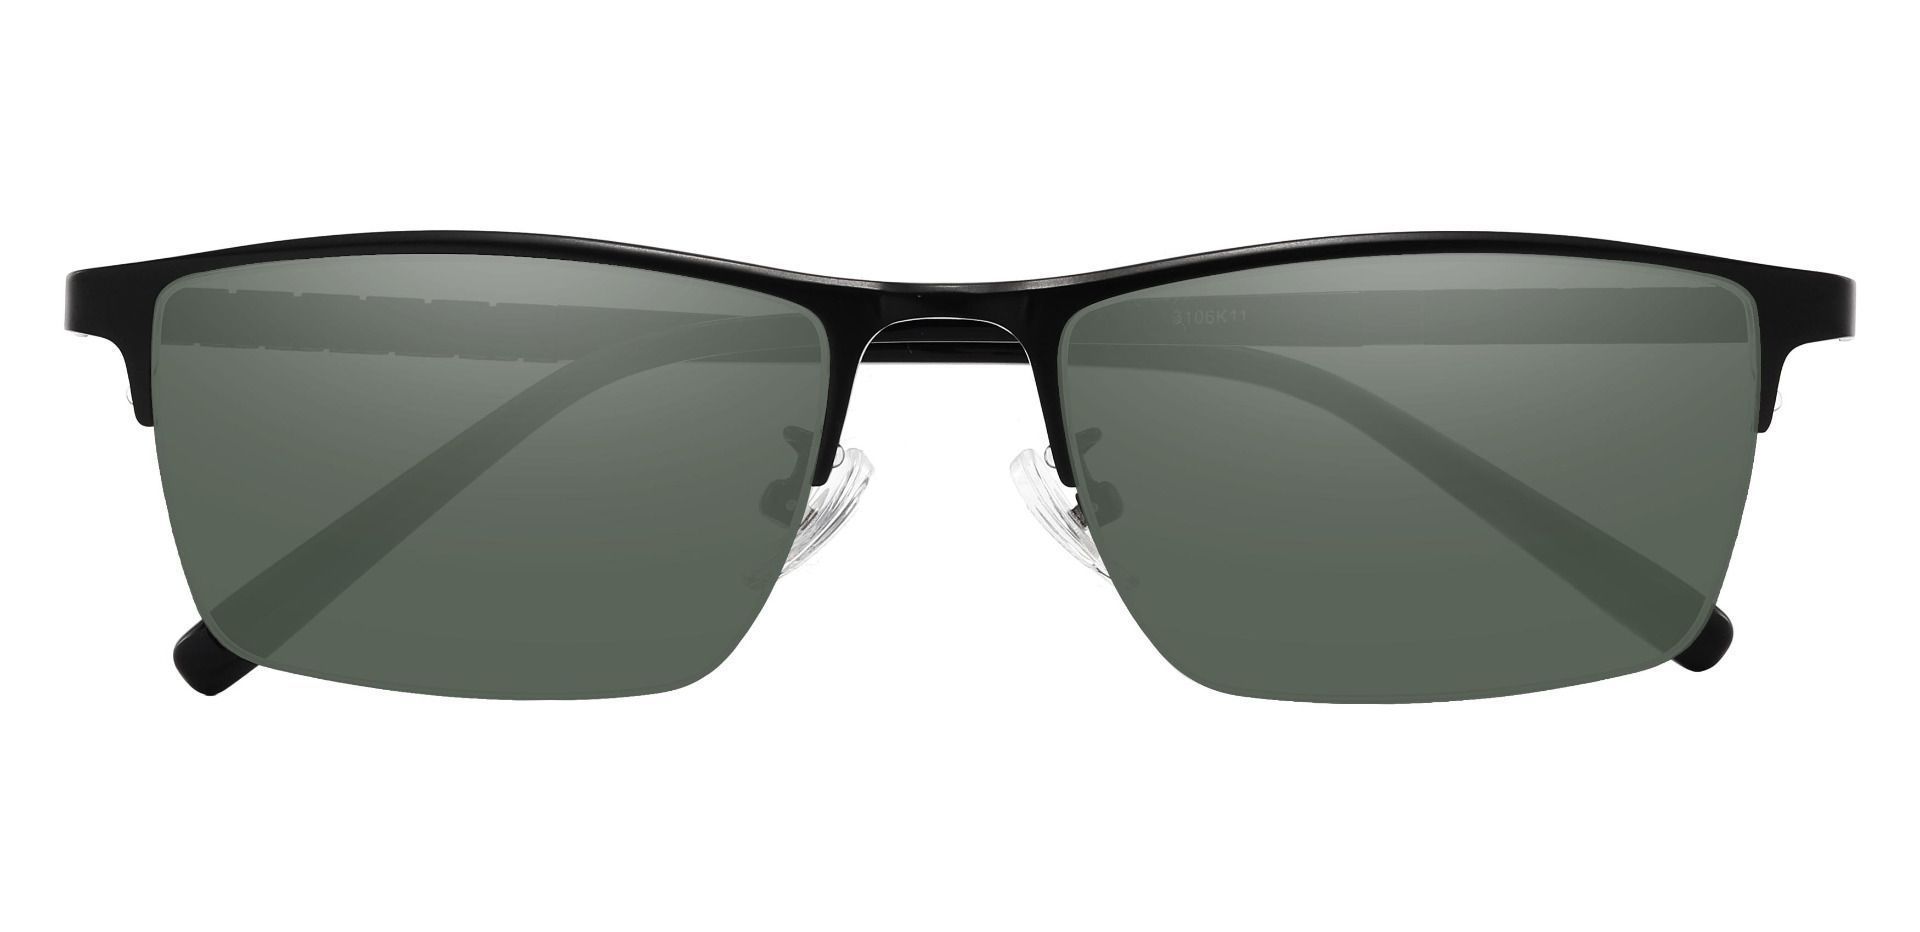 Maine Rectangle Lined Bifocal Sunglasses - Black Frame With Green Lenses